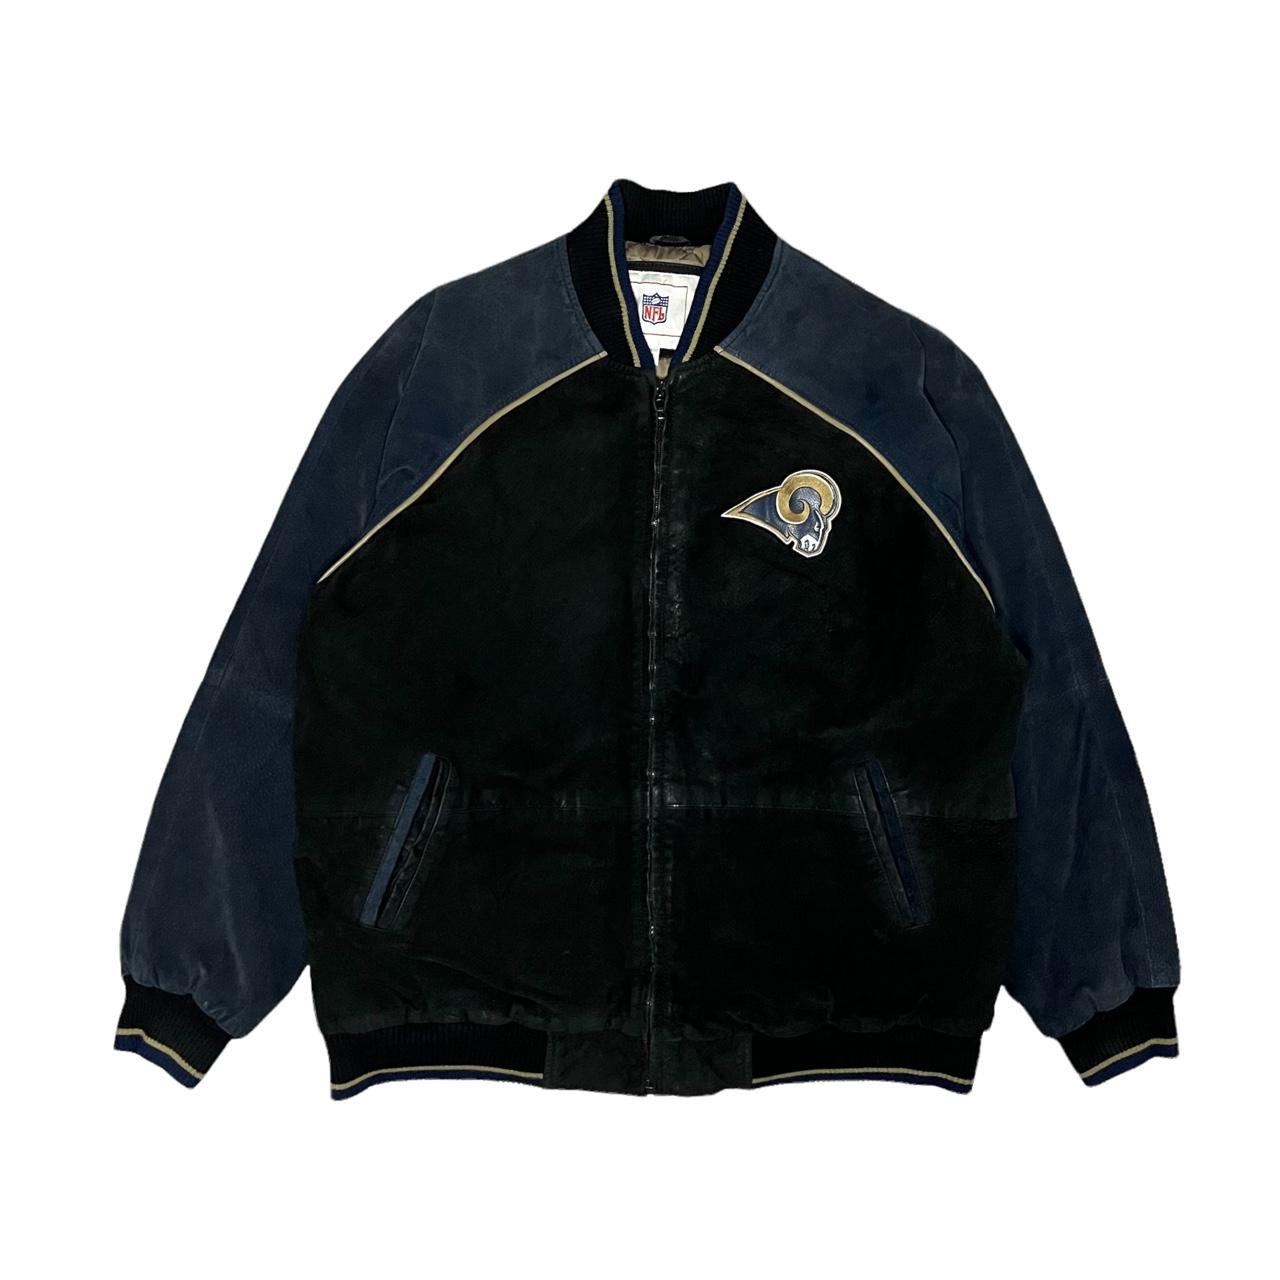 Product Image 1 - Retro Rams Jacket

- Great Condition!
-